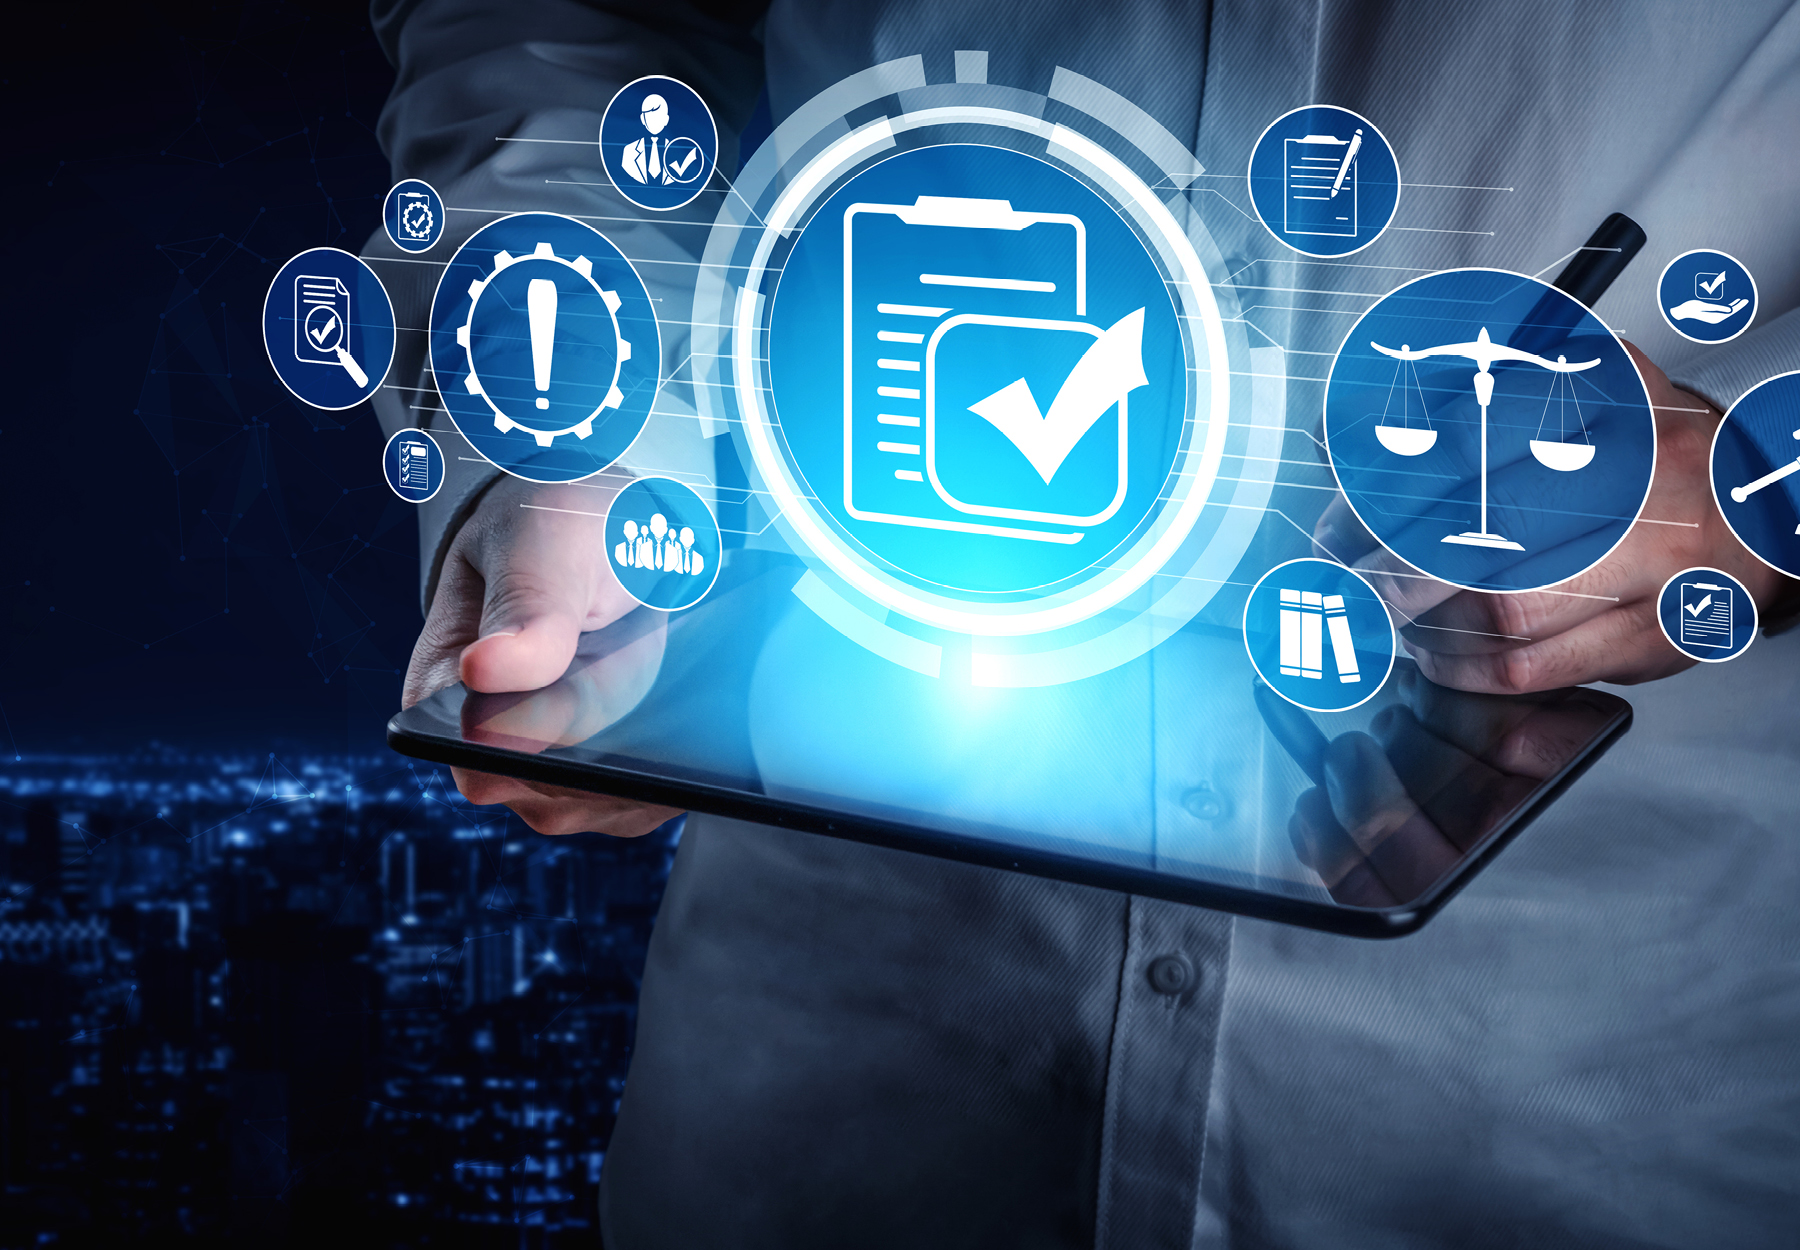 Lab professional in white lab coat is holding a tablet with compliance and legal related graphics coming out. Lab compliance concept. iStock image.